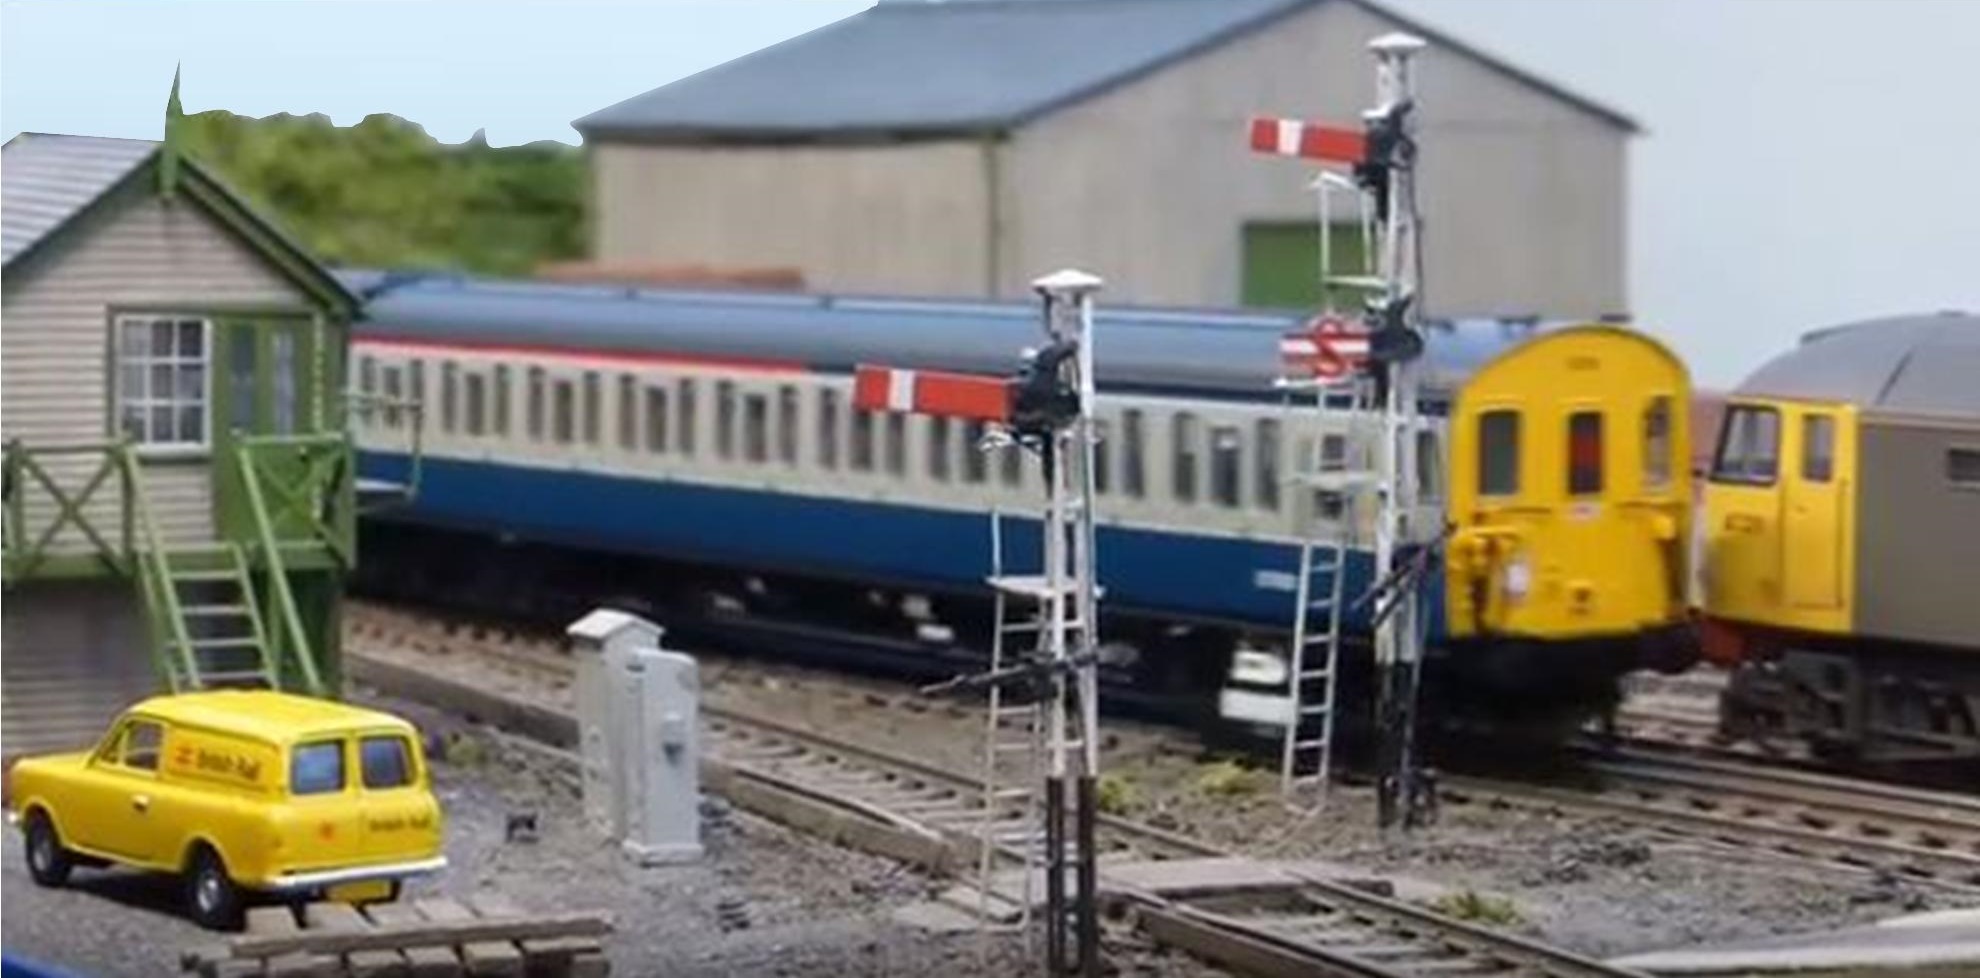 railway scenery for scale model trains